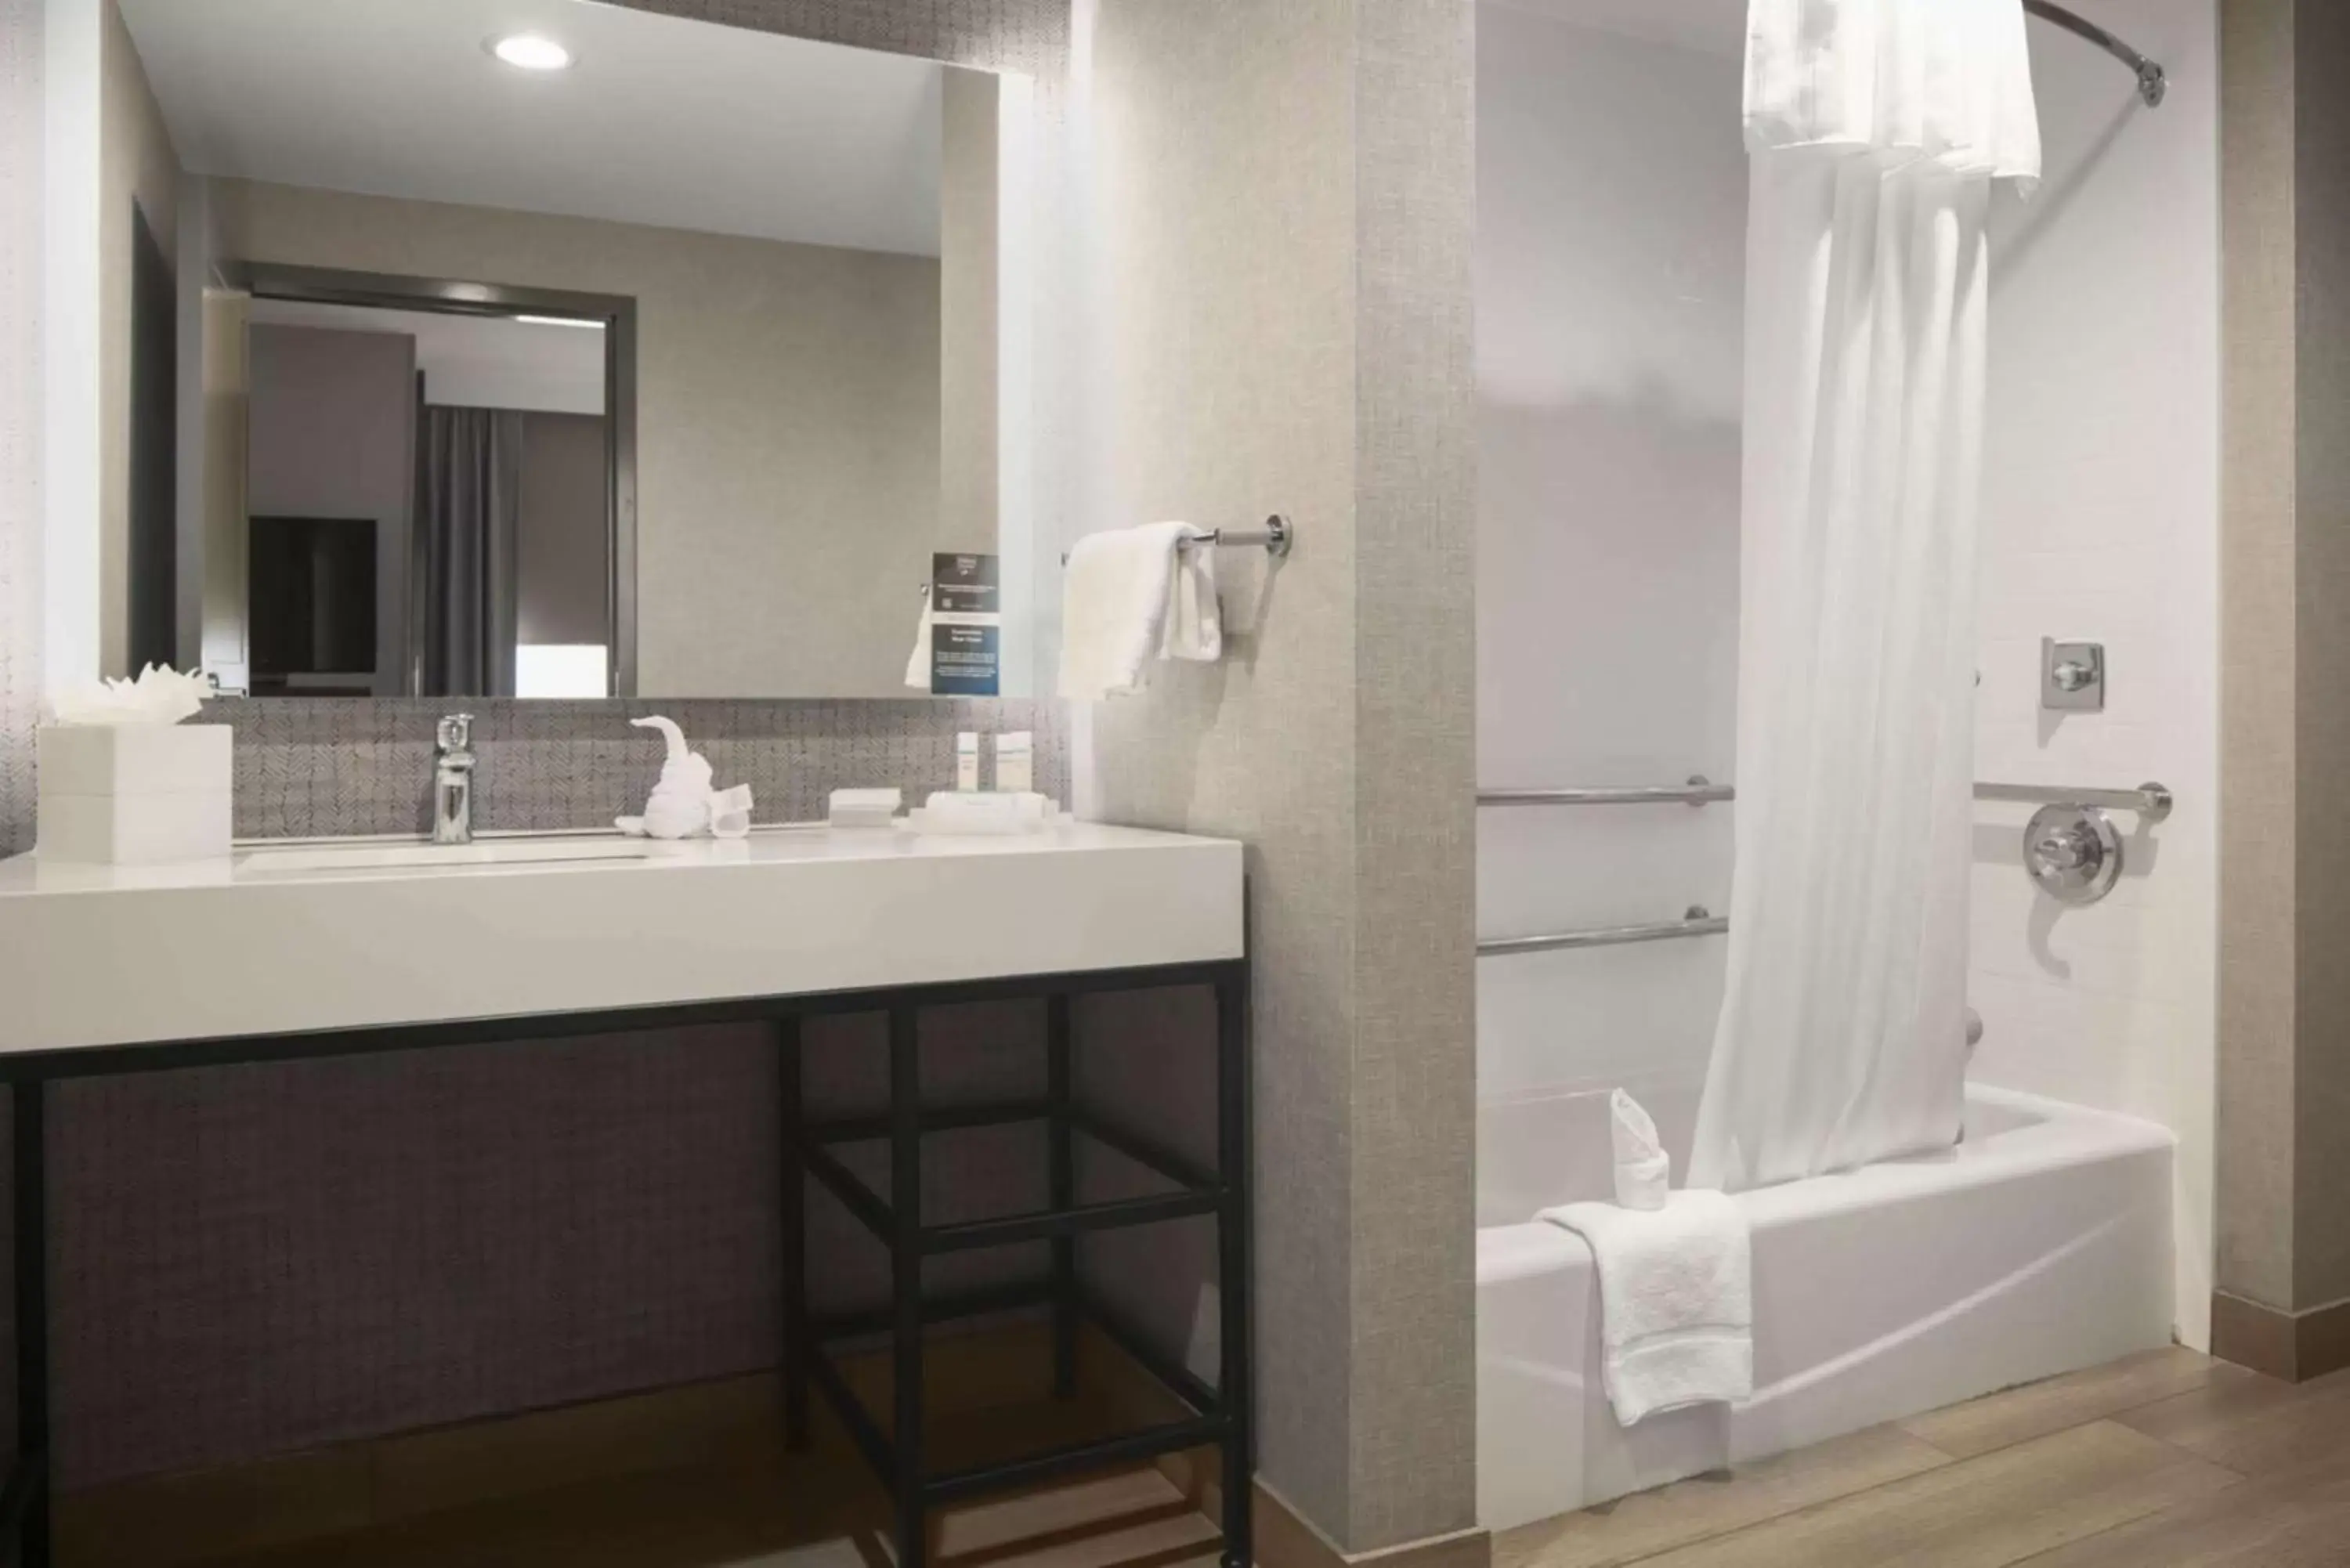 Bathroom in Homewood Suites by Hilton DFW Airport South, TX